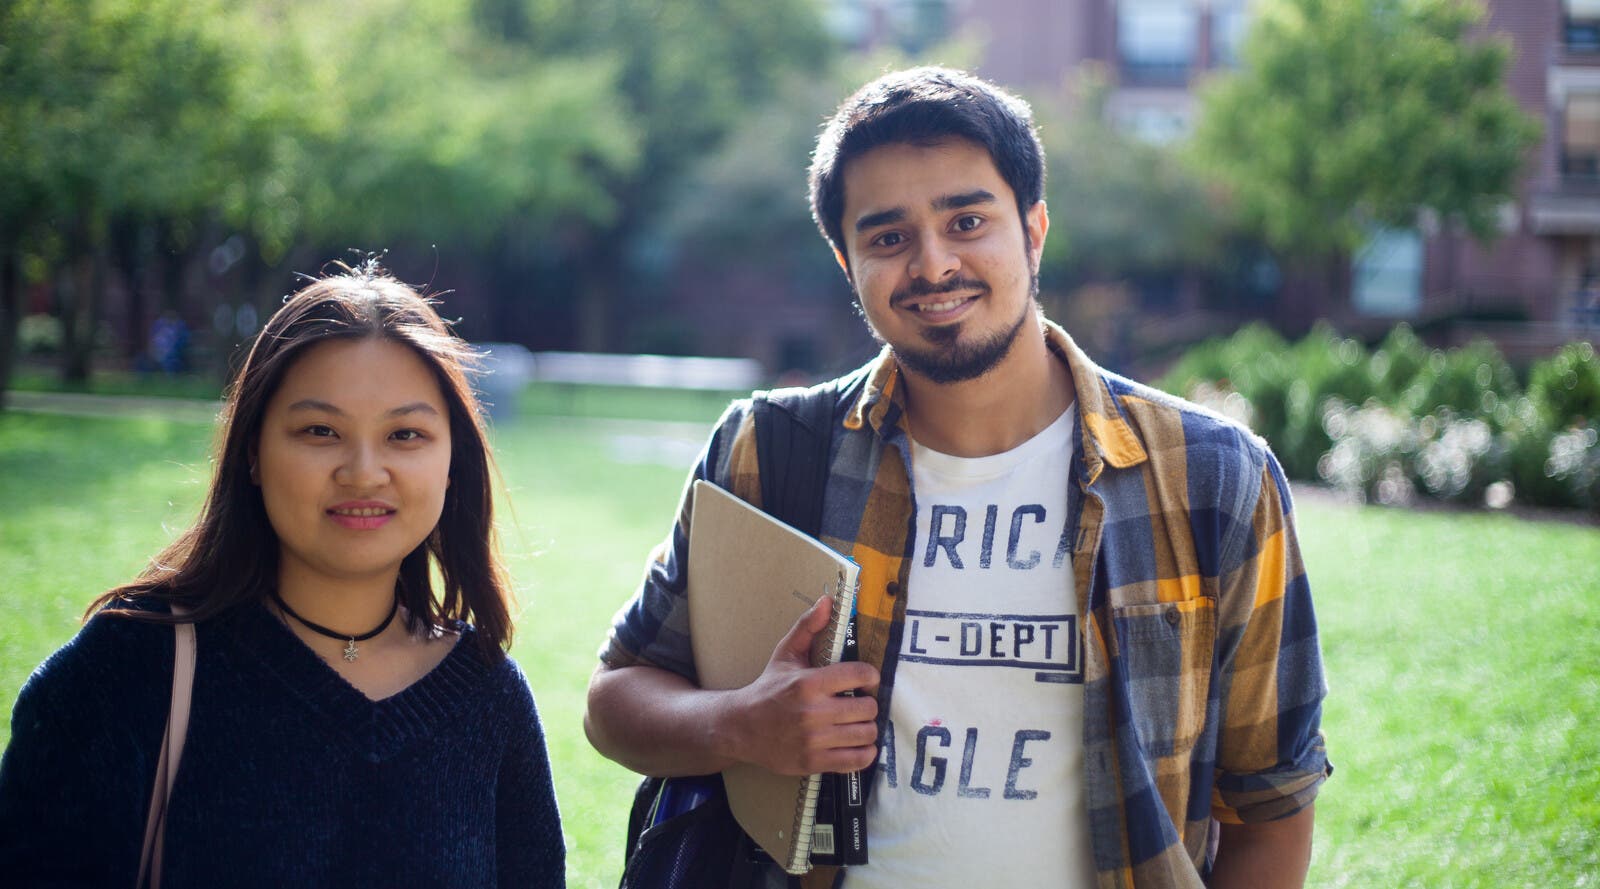 Students smiling outside campus